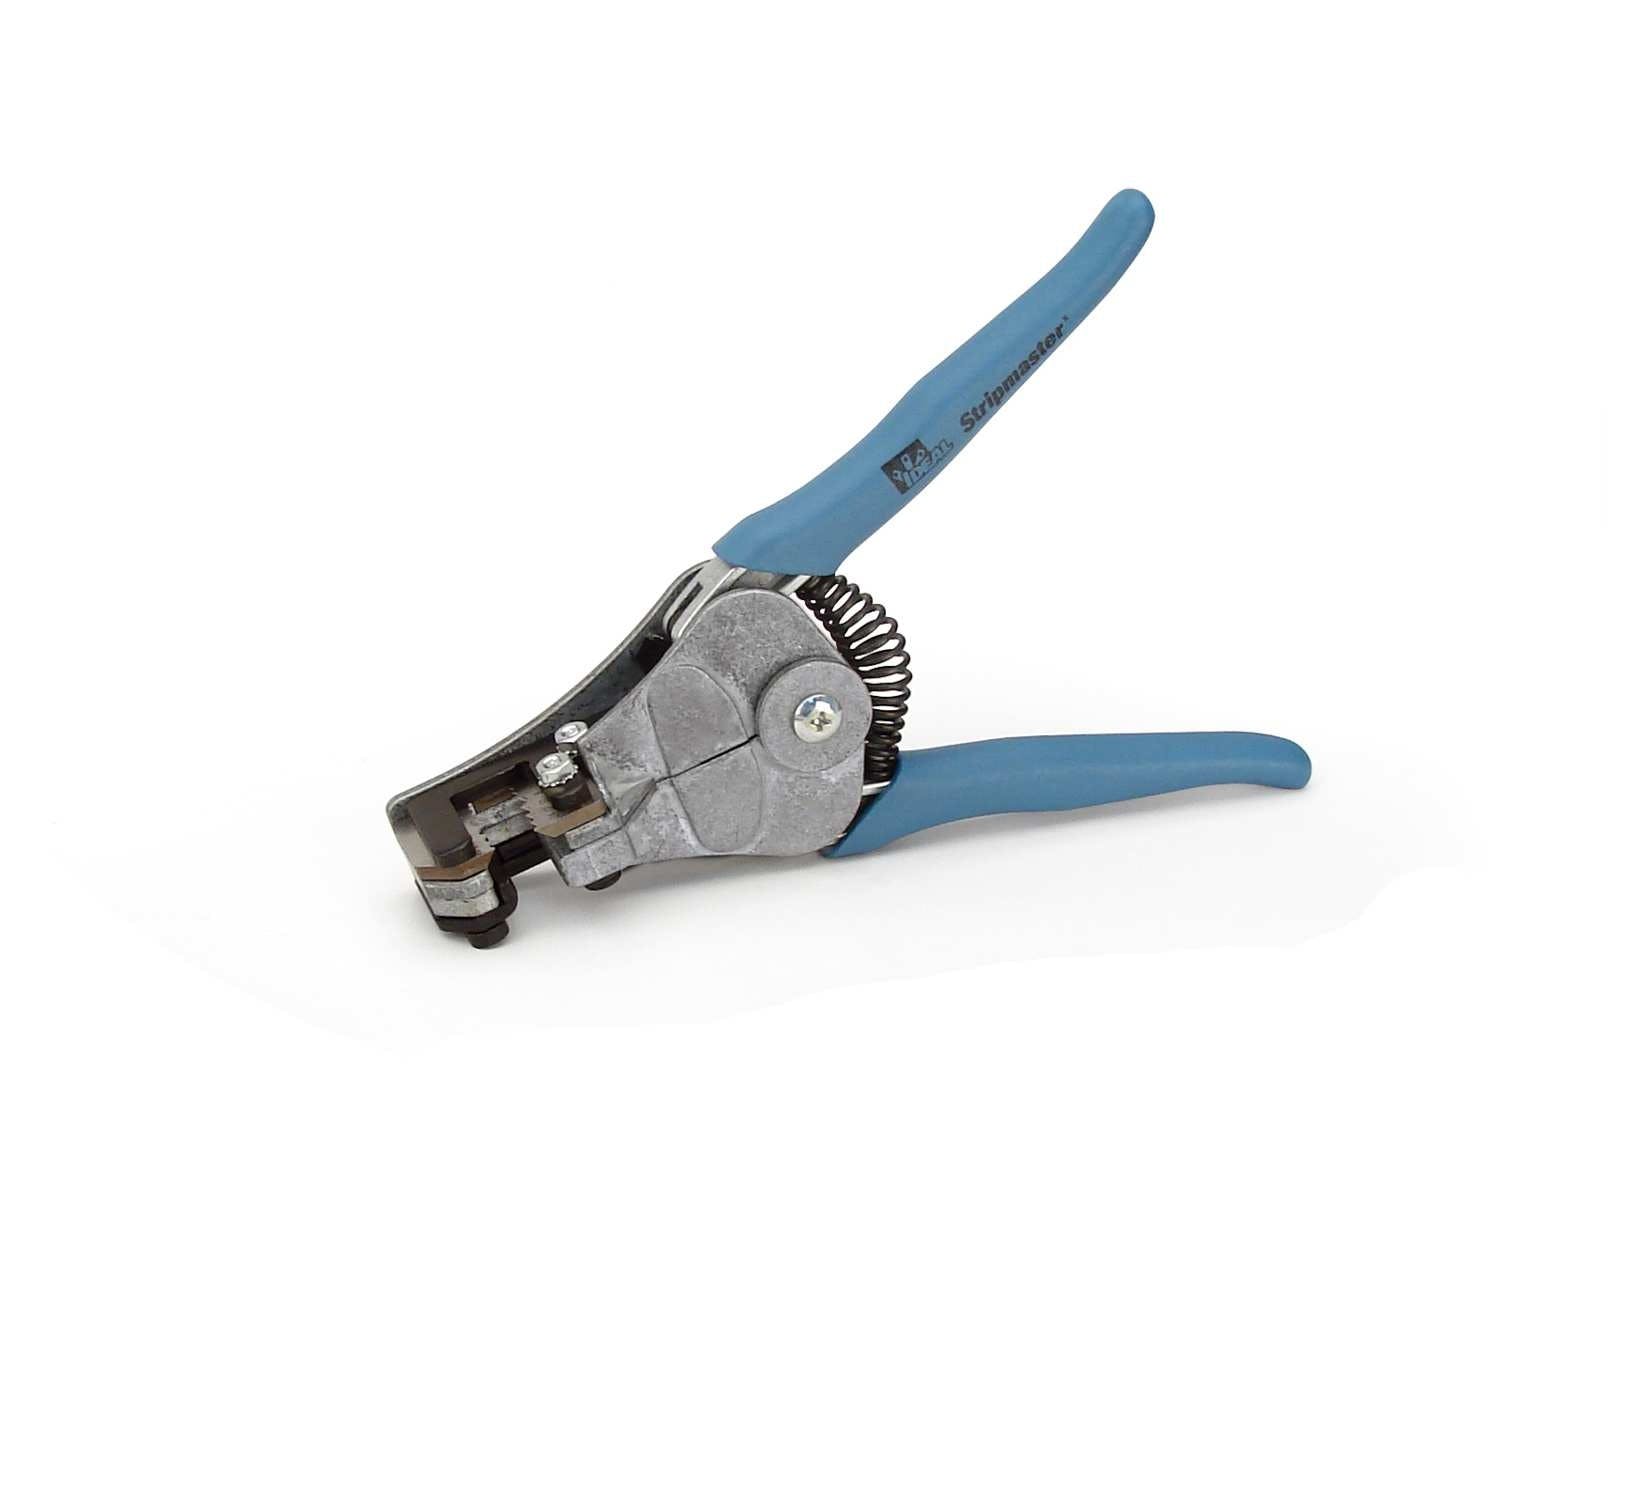 FAST - Fuel Air Spark Technology 307068 Wire Stripper 22-10 Awg.